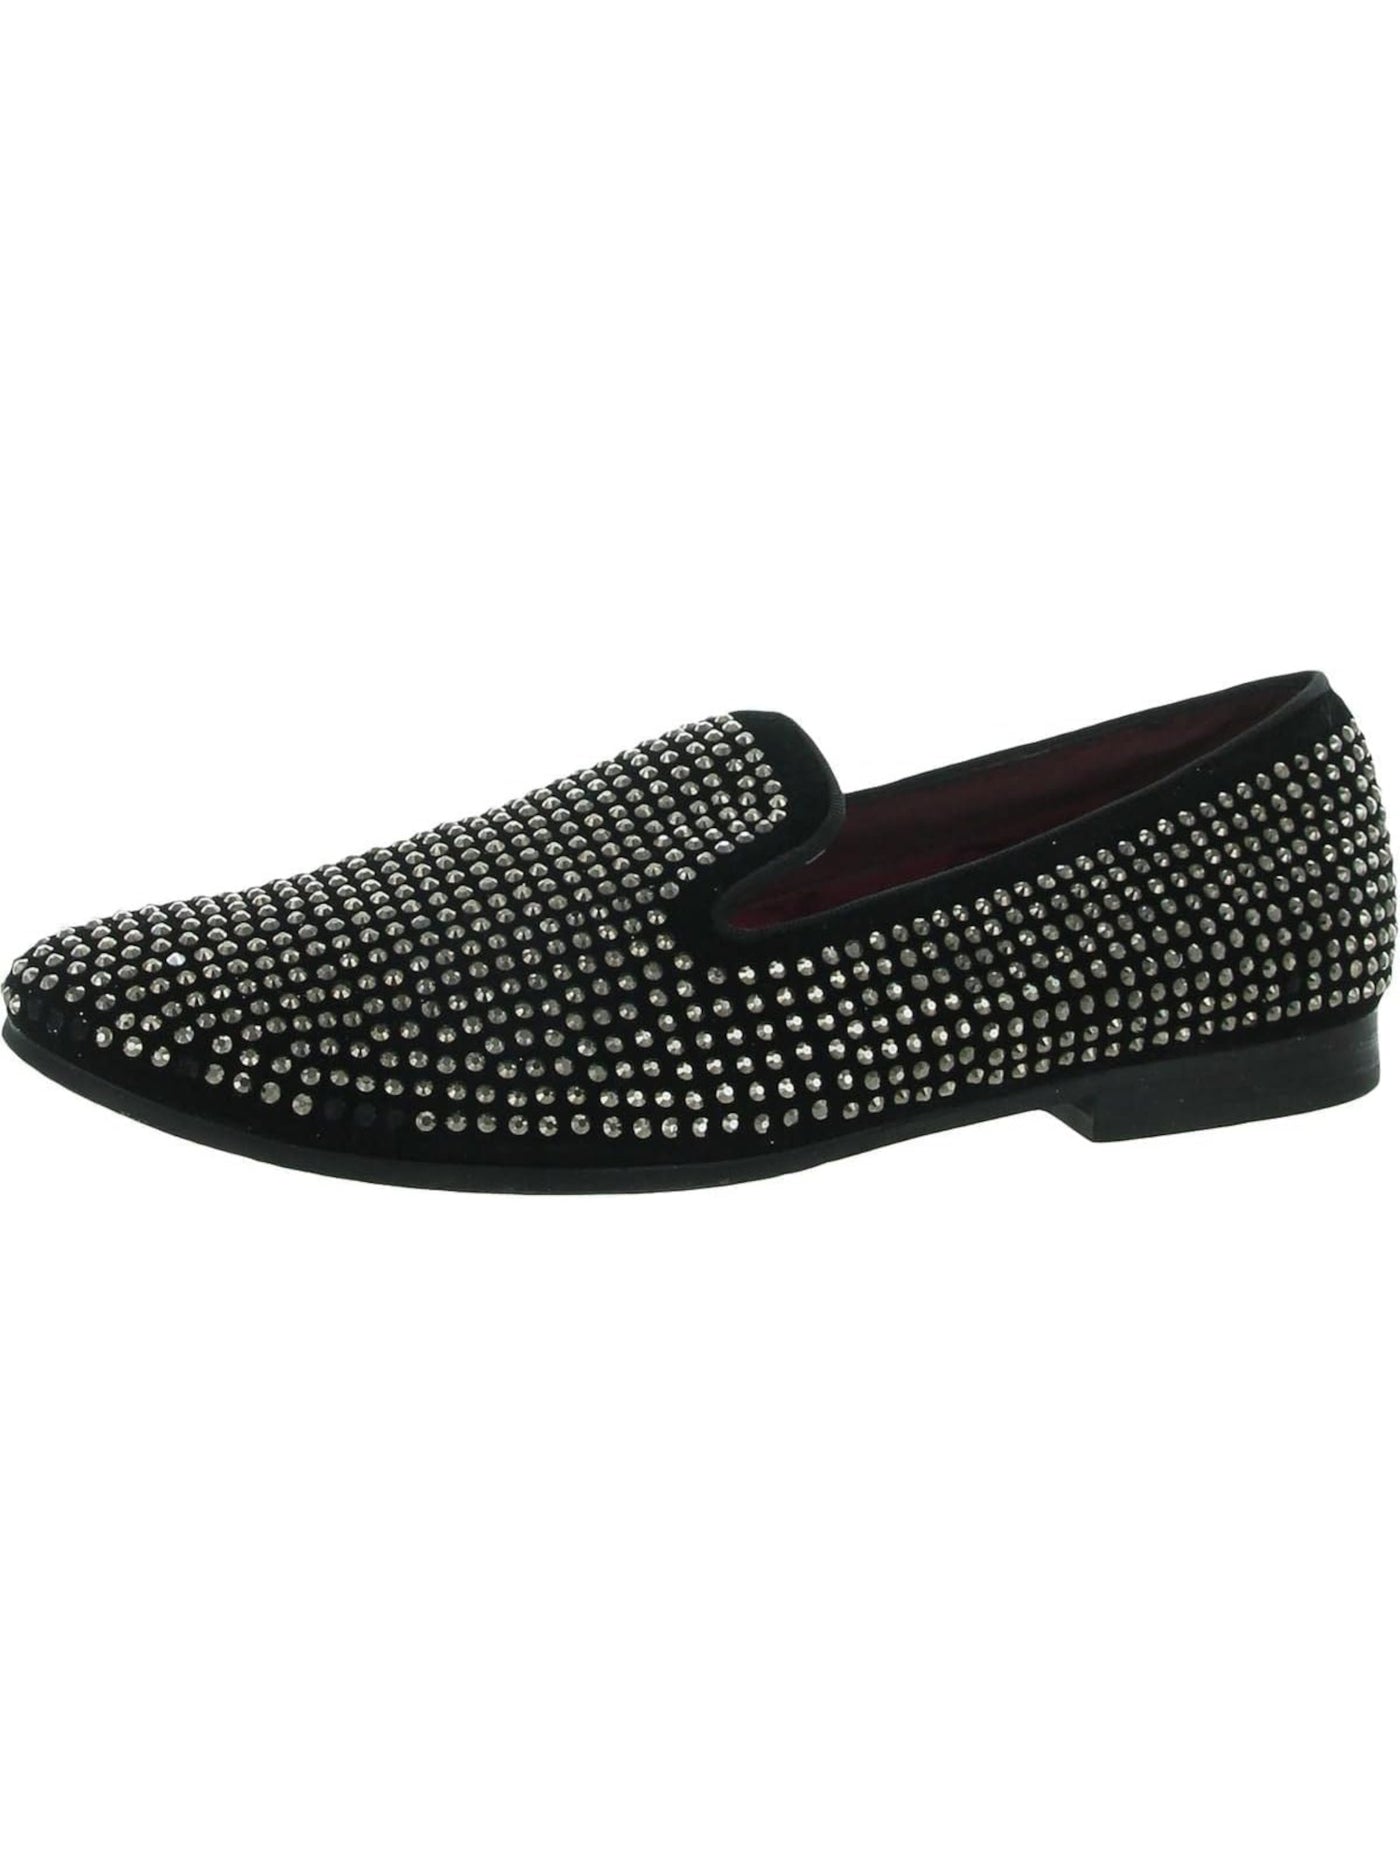 STEVE MADDEN Mens Black Notched Embellished Padded Caviar Rhinestone Almond Toe Slip On Leather Loafers Shoes 8.5